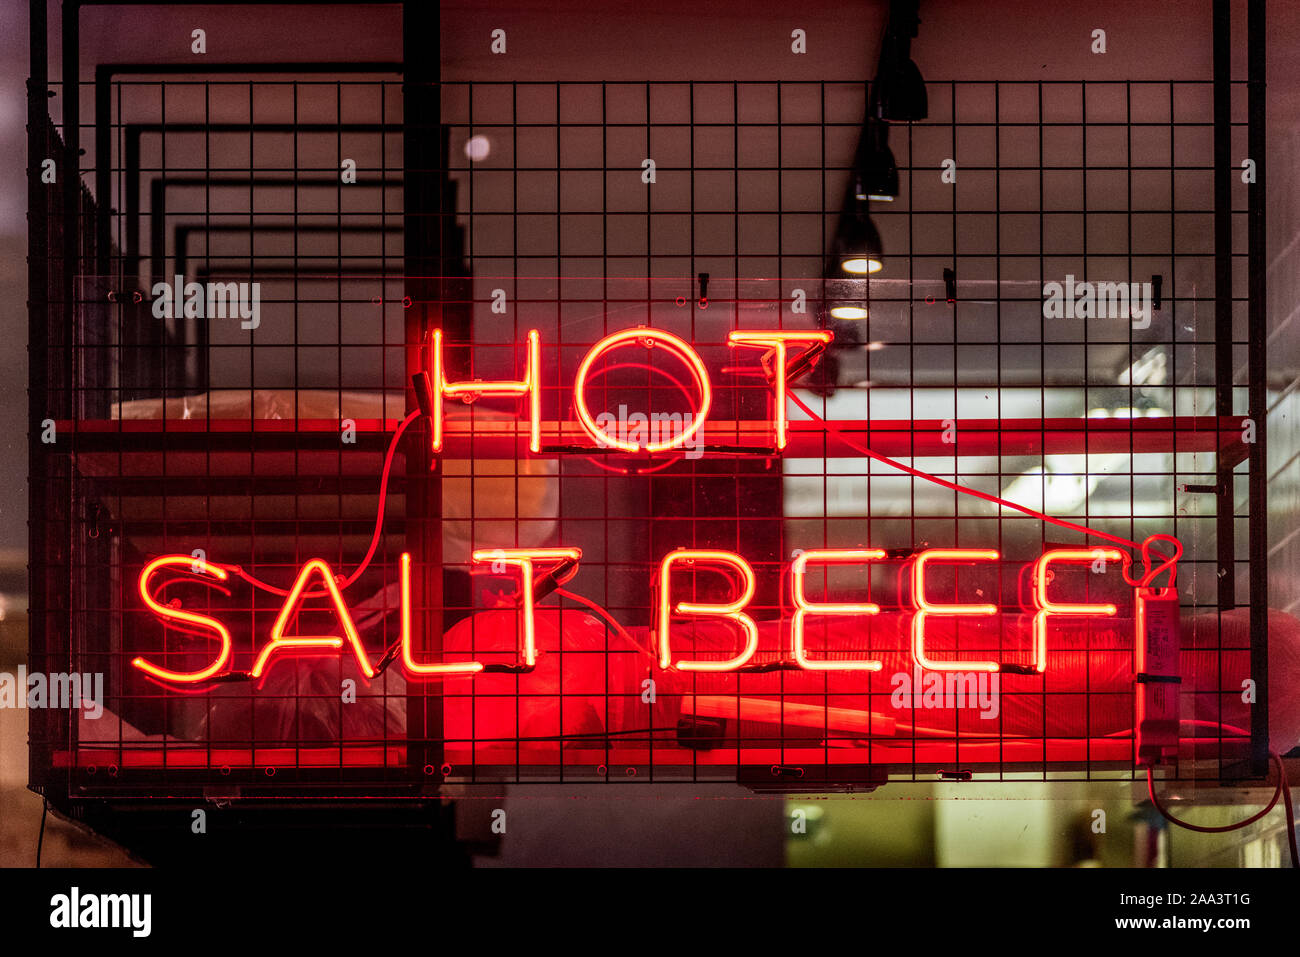 Hot Salt Beef Neon Sign Central London Stock Photo